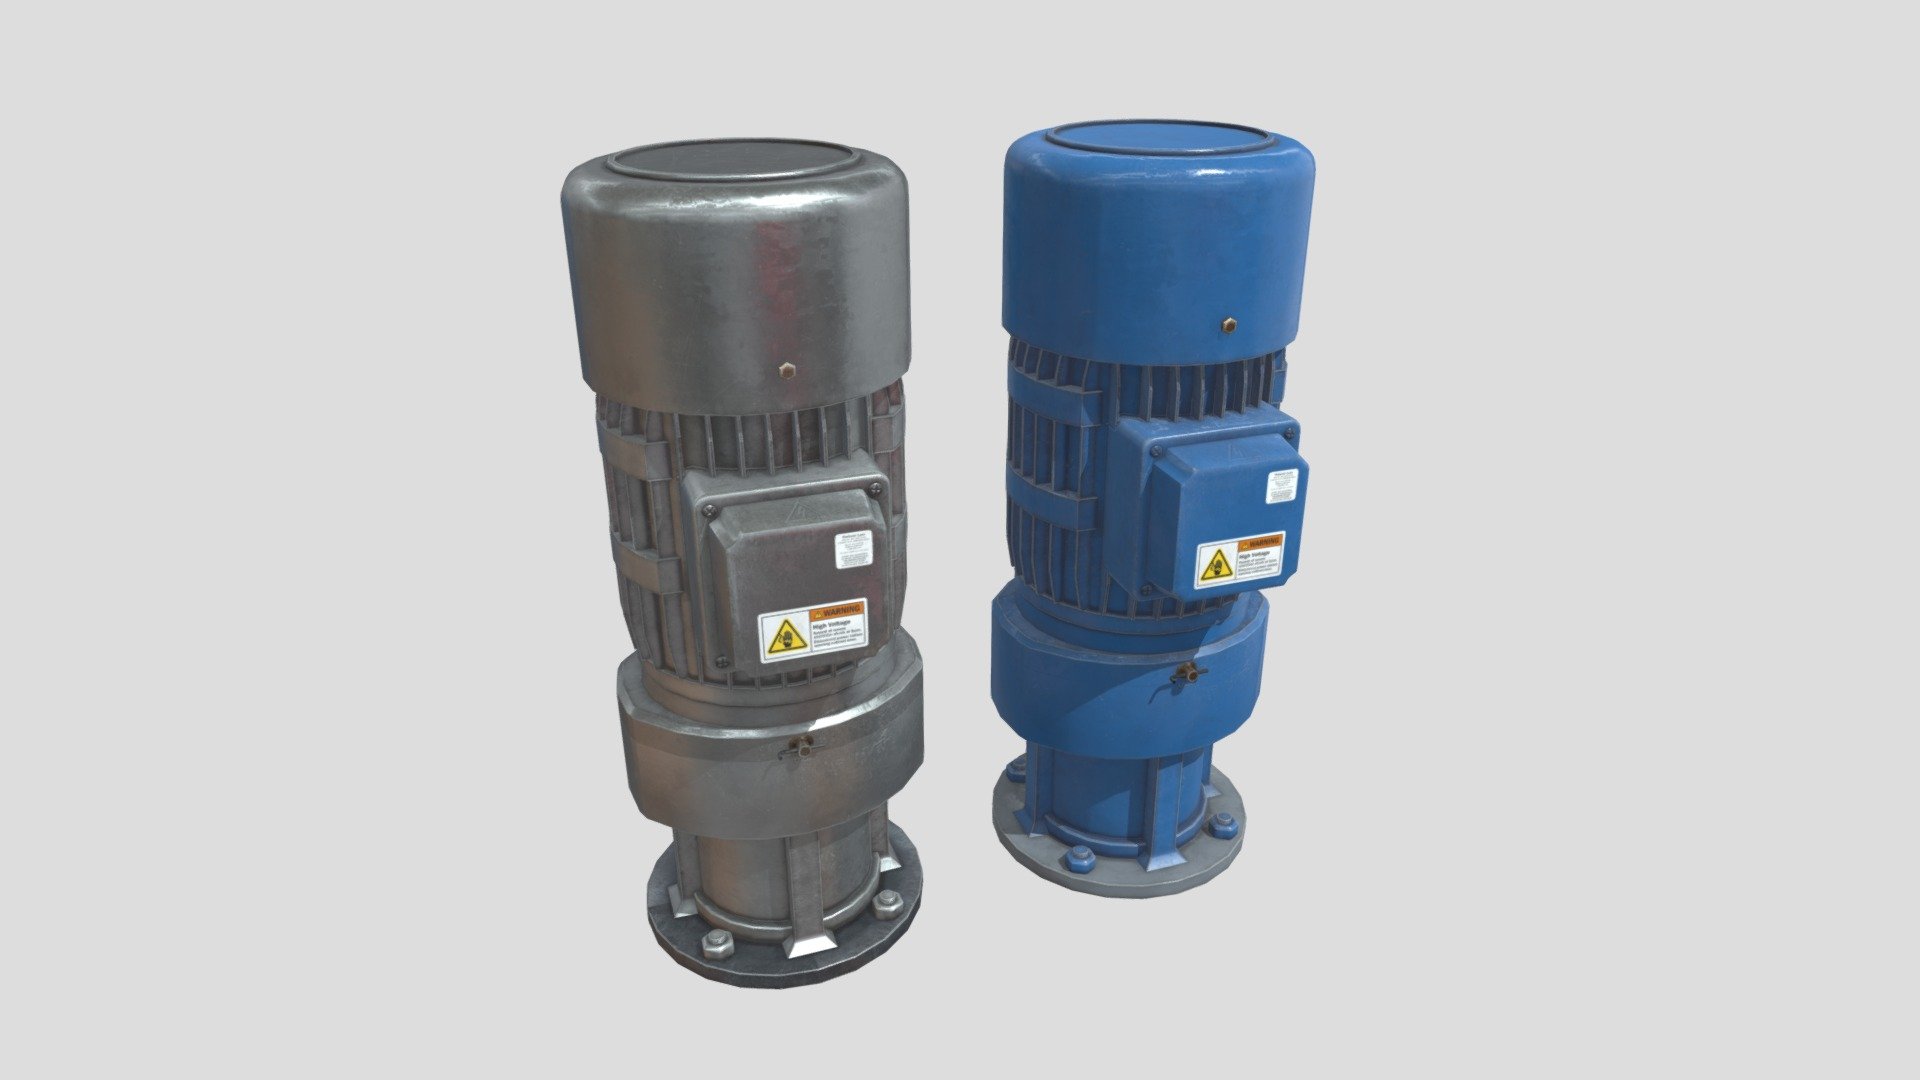 This Industrial Motors is a great model to add to any machine, Industrial Environment, Factory, Etc. The model has 2 different textures, a painted and non painted version. The model is viewable from all angles and distances.

This Includes:

The mesh
4K and 2K Texture Sets (Albedo, Metallic, Roughness, Normal, Height)
2 Variants ( Painted, Non-painted)
The mesh is UV Unwrapped with vertex colors for easy retexturing 3d model